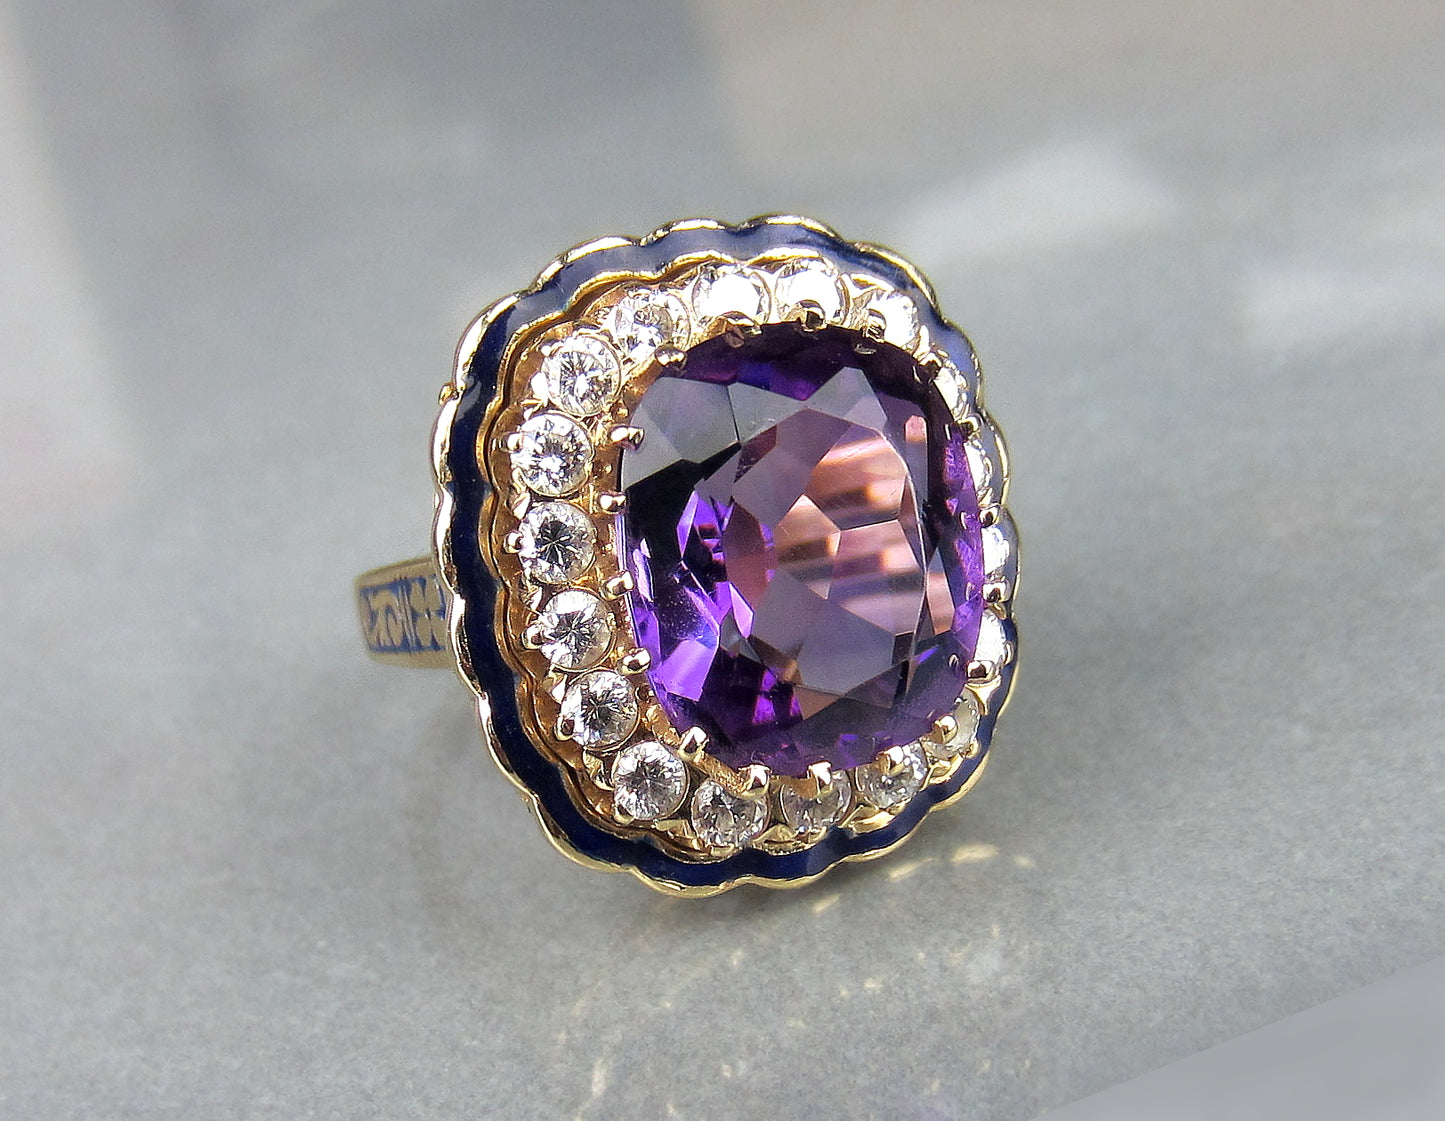 SOLD--Mid-Century Amethyst, Diamond and Enamel Ring 14k, Property of Ruth Mitchell c. 1940's